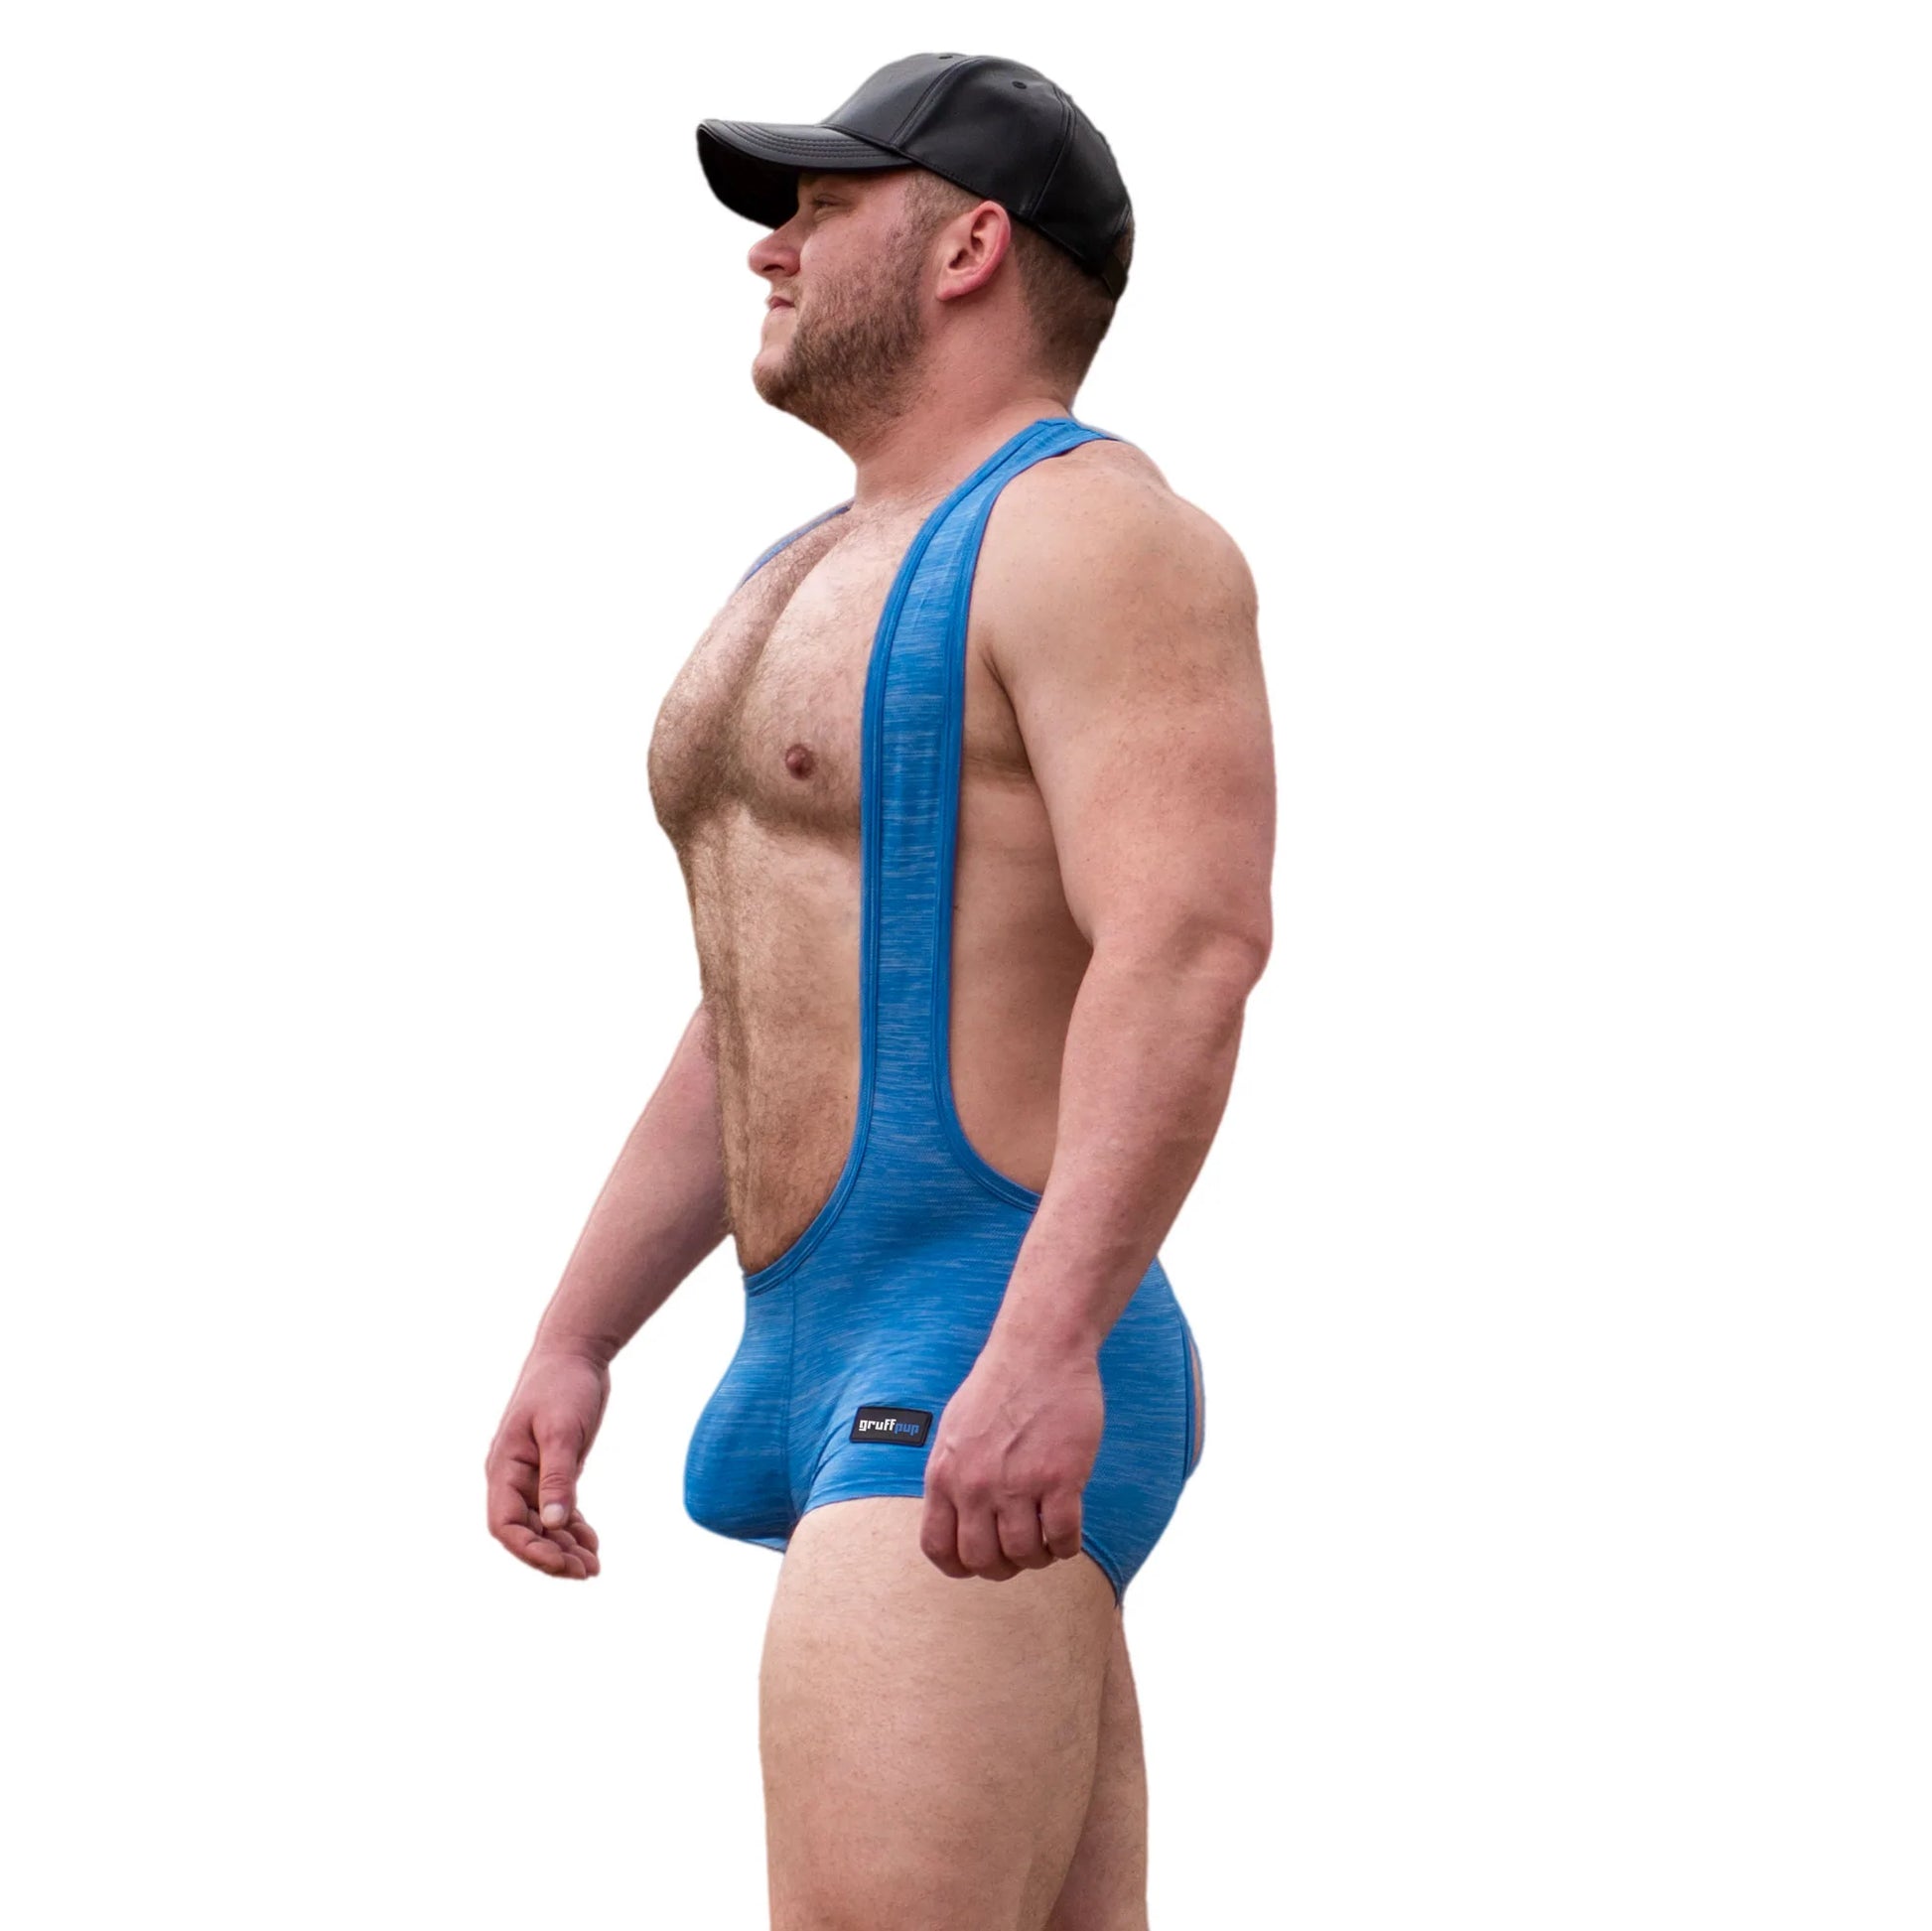 The front of the Raw Contact Assless Singlet.